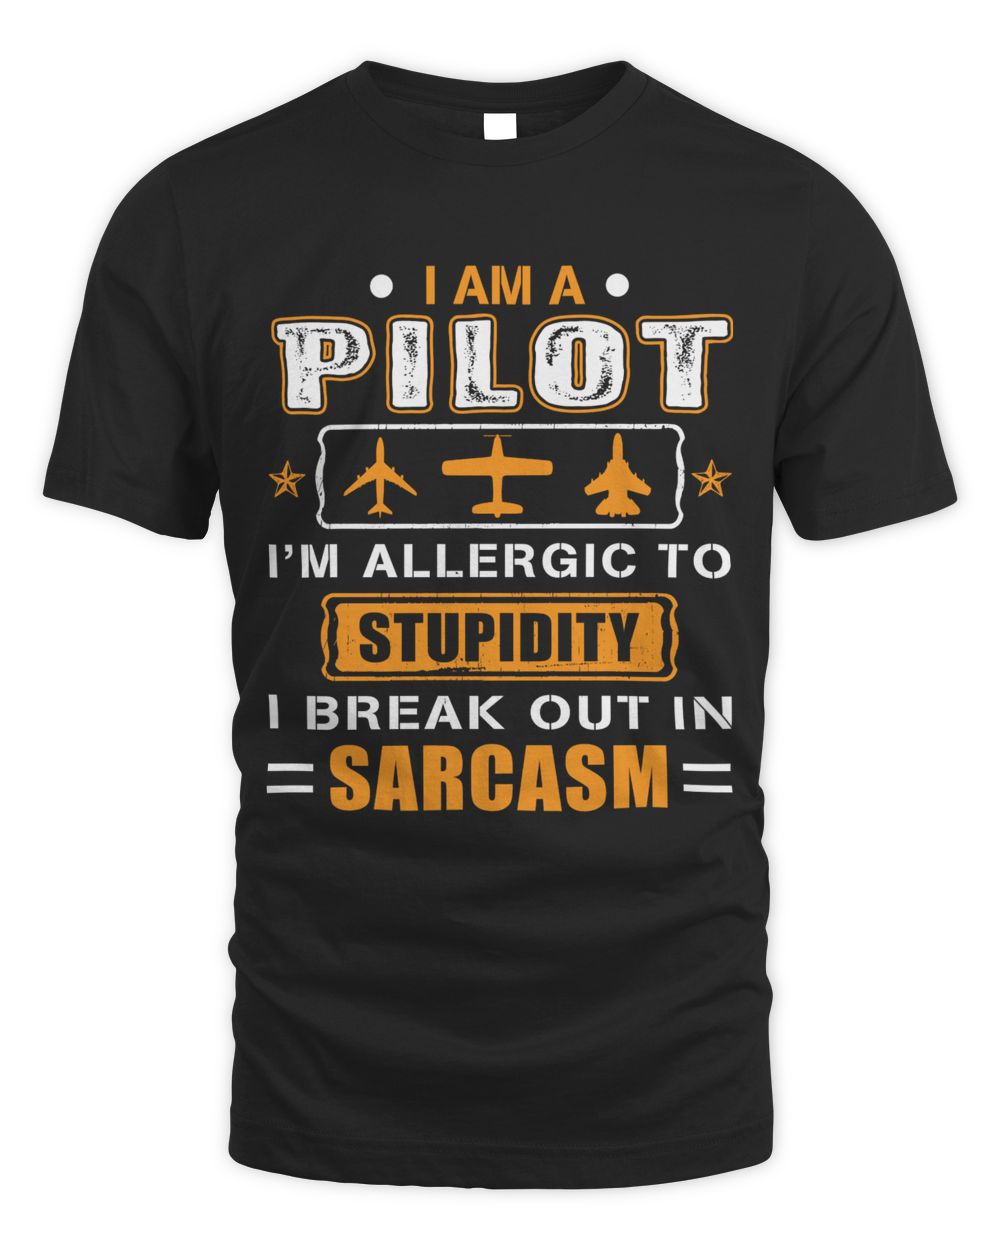 I am a pilot I'm allergic to stupidity I break out in sarcasm Unisex Standard T-Shirt black 